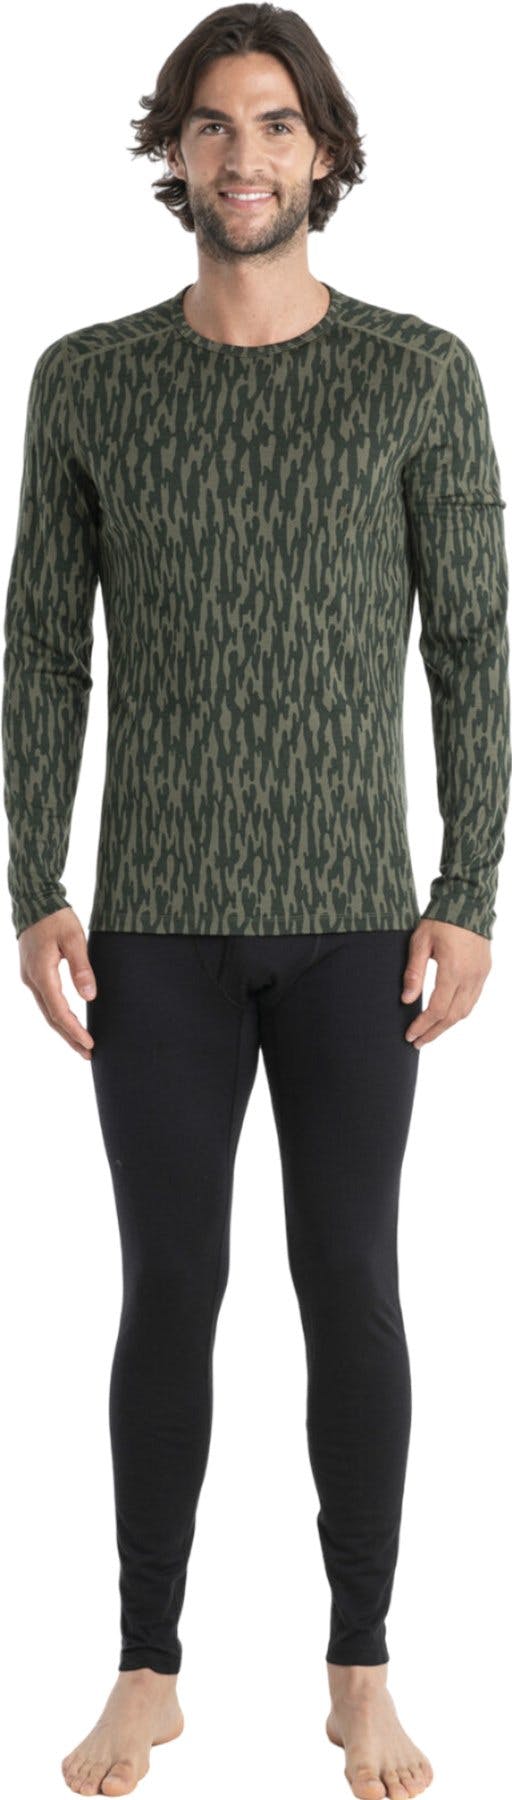 Product image for Merino 200 Oasis Glacial Flow Long Sleeve Thermal Top - Men's